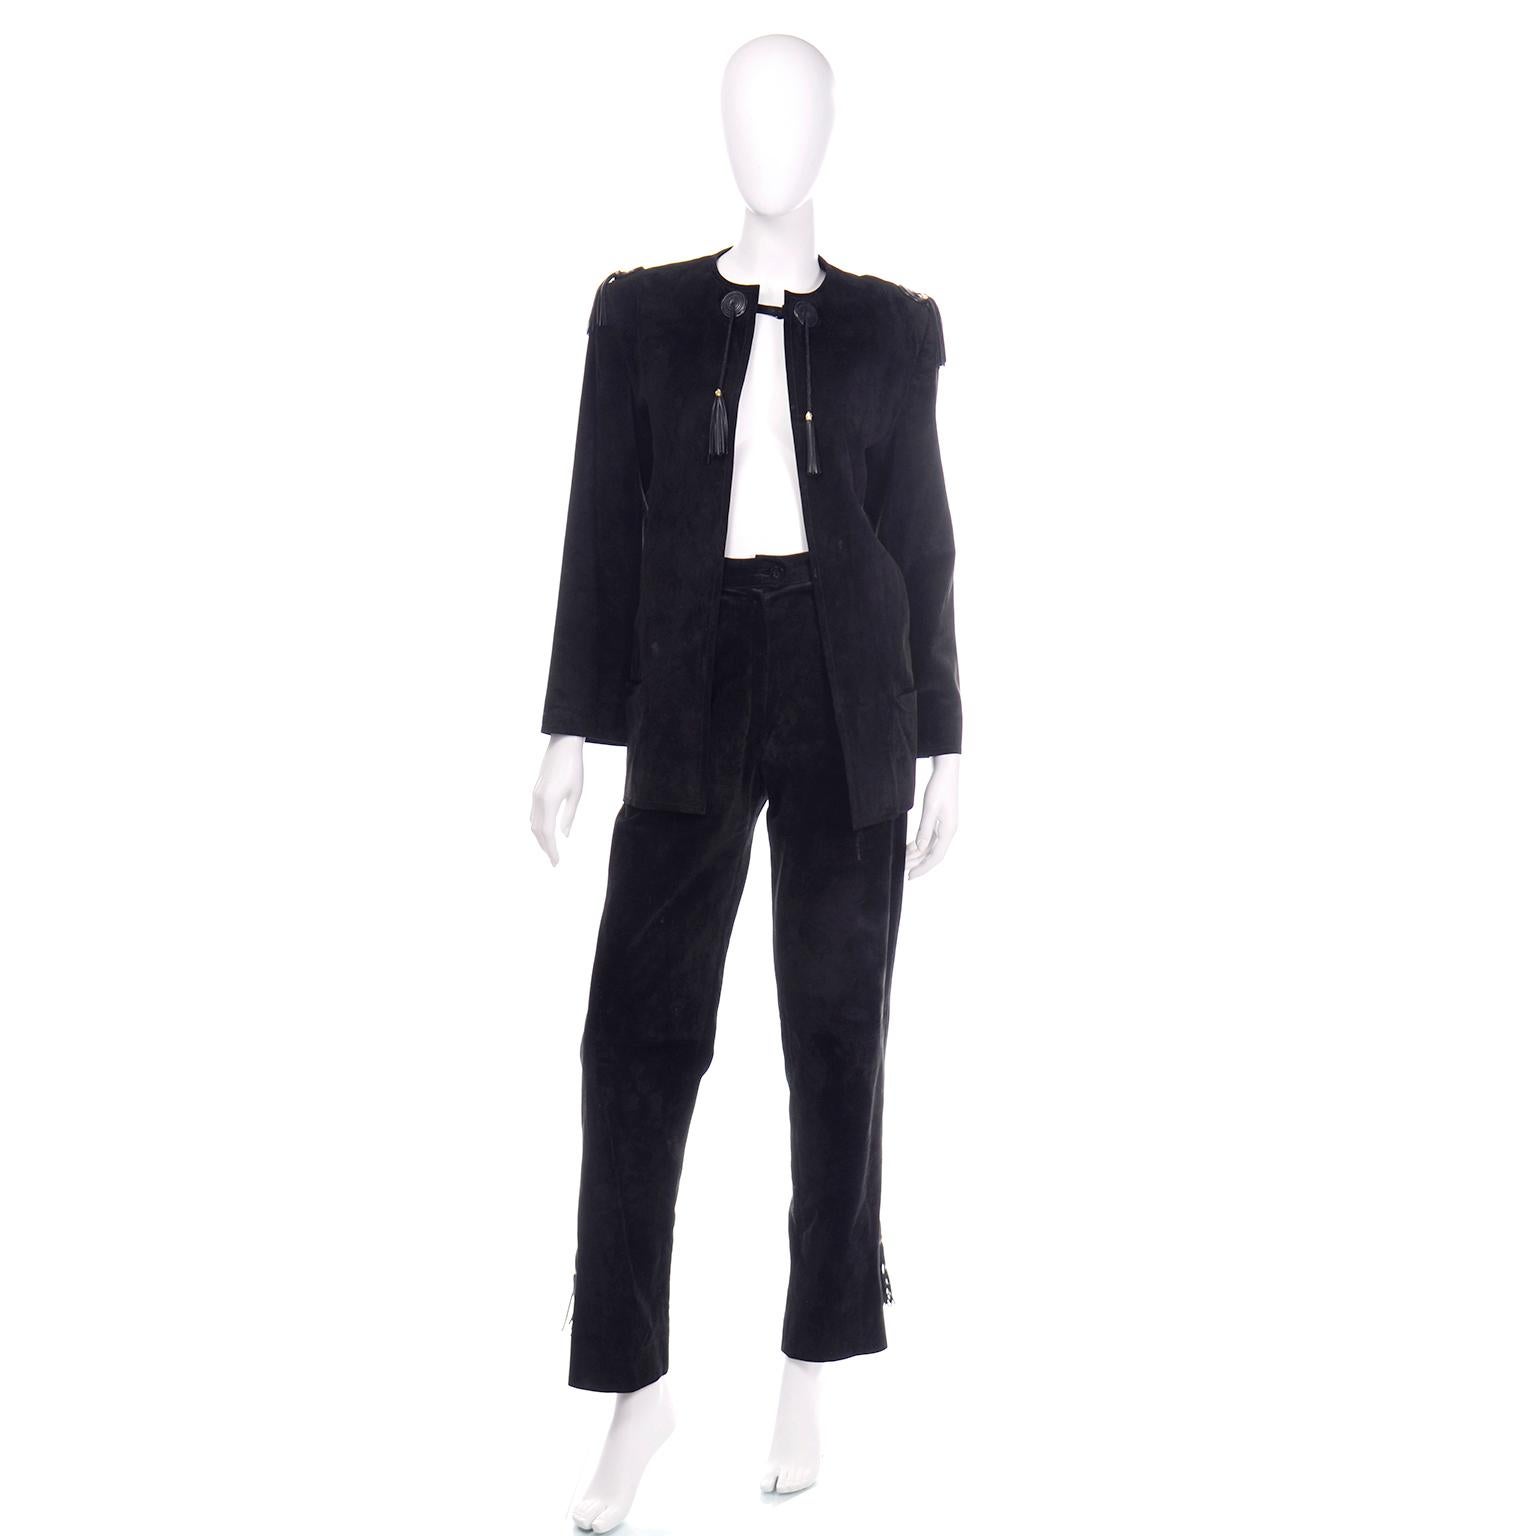 This is a such a fabulous vintage 1970's Gucci black suede pants and jacket suit with leather tassel details.The  jacket has tassels on the shoulders and collar and closes with a single button at the top of the neck The pants are high waisted with a